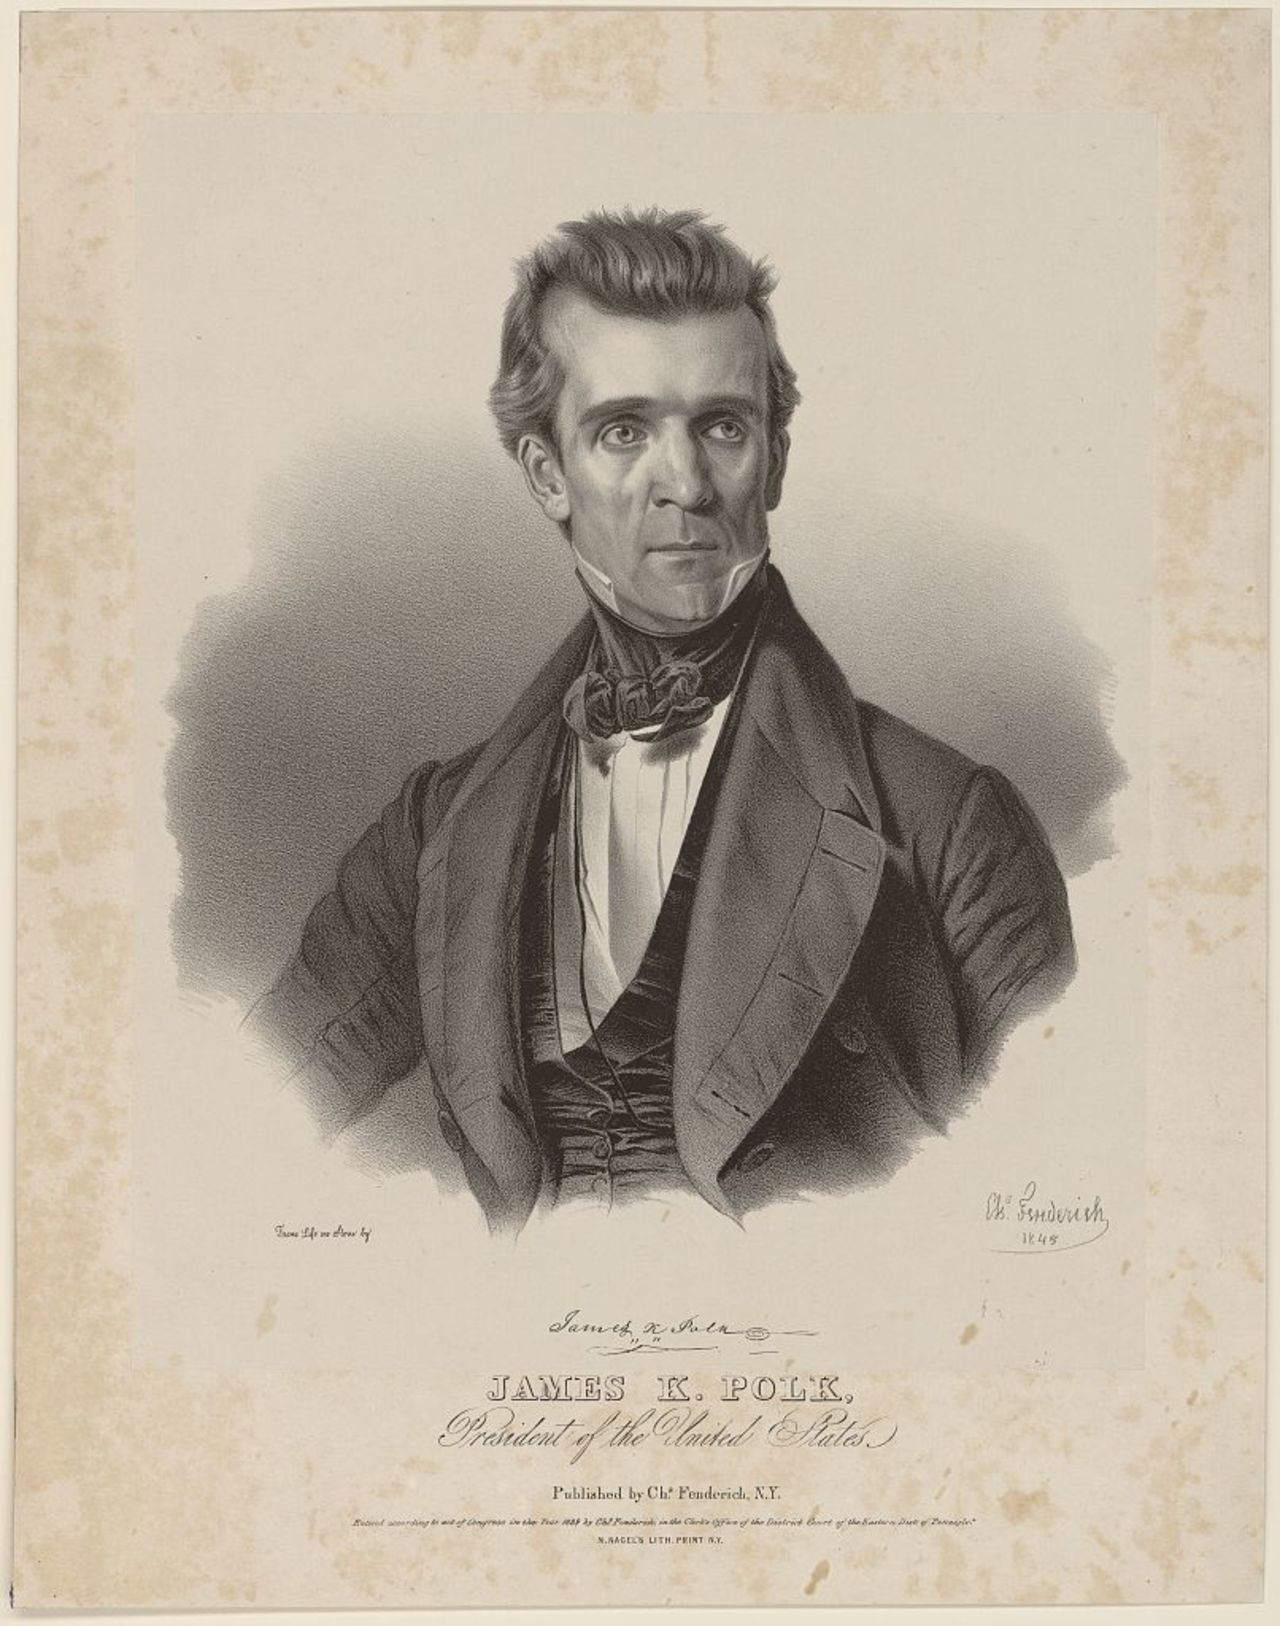 "Reannexation of Texas and Reoccupation of Oregon" was Polk's slogan in 1844.